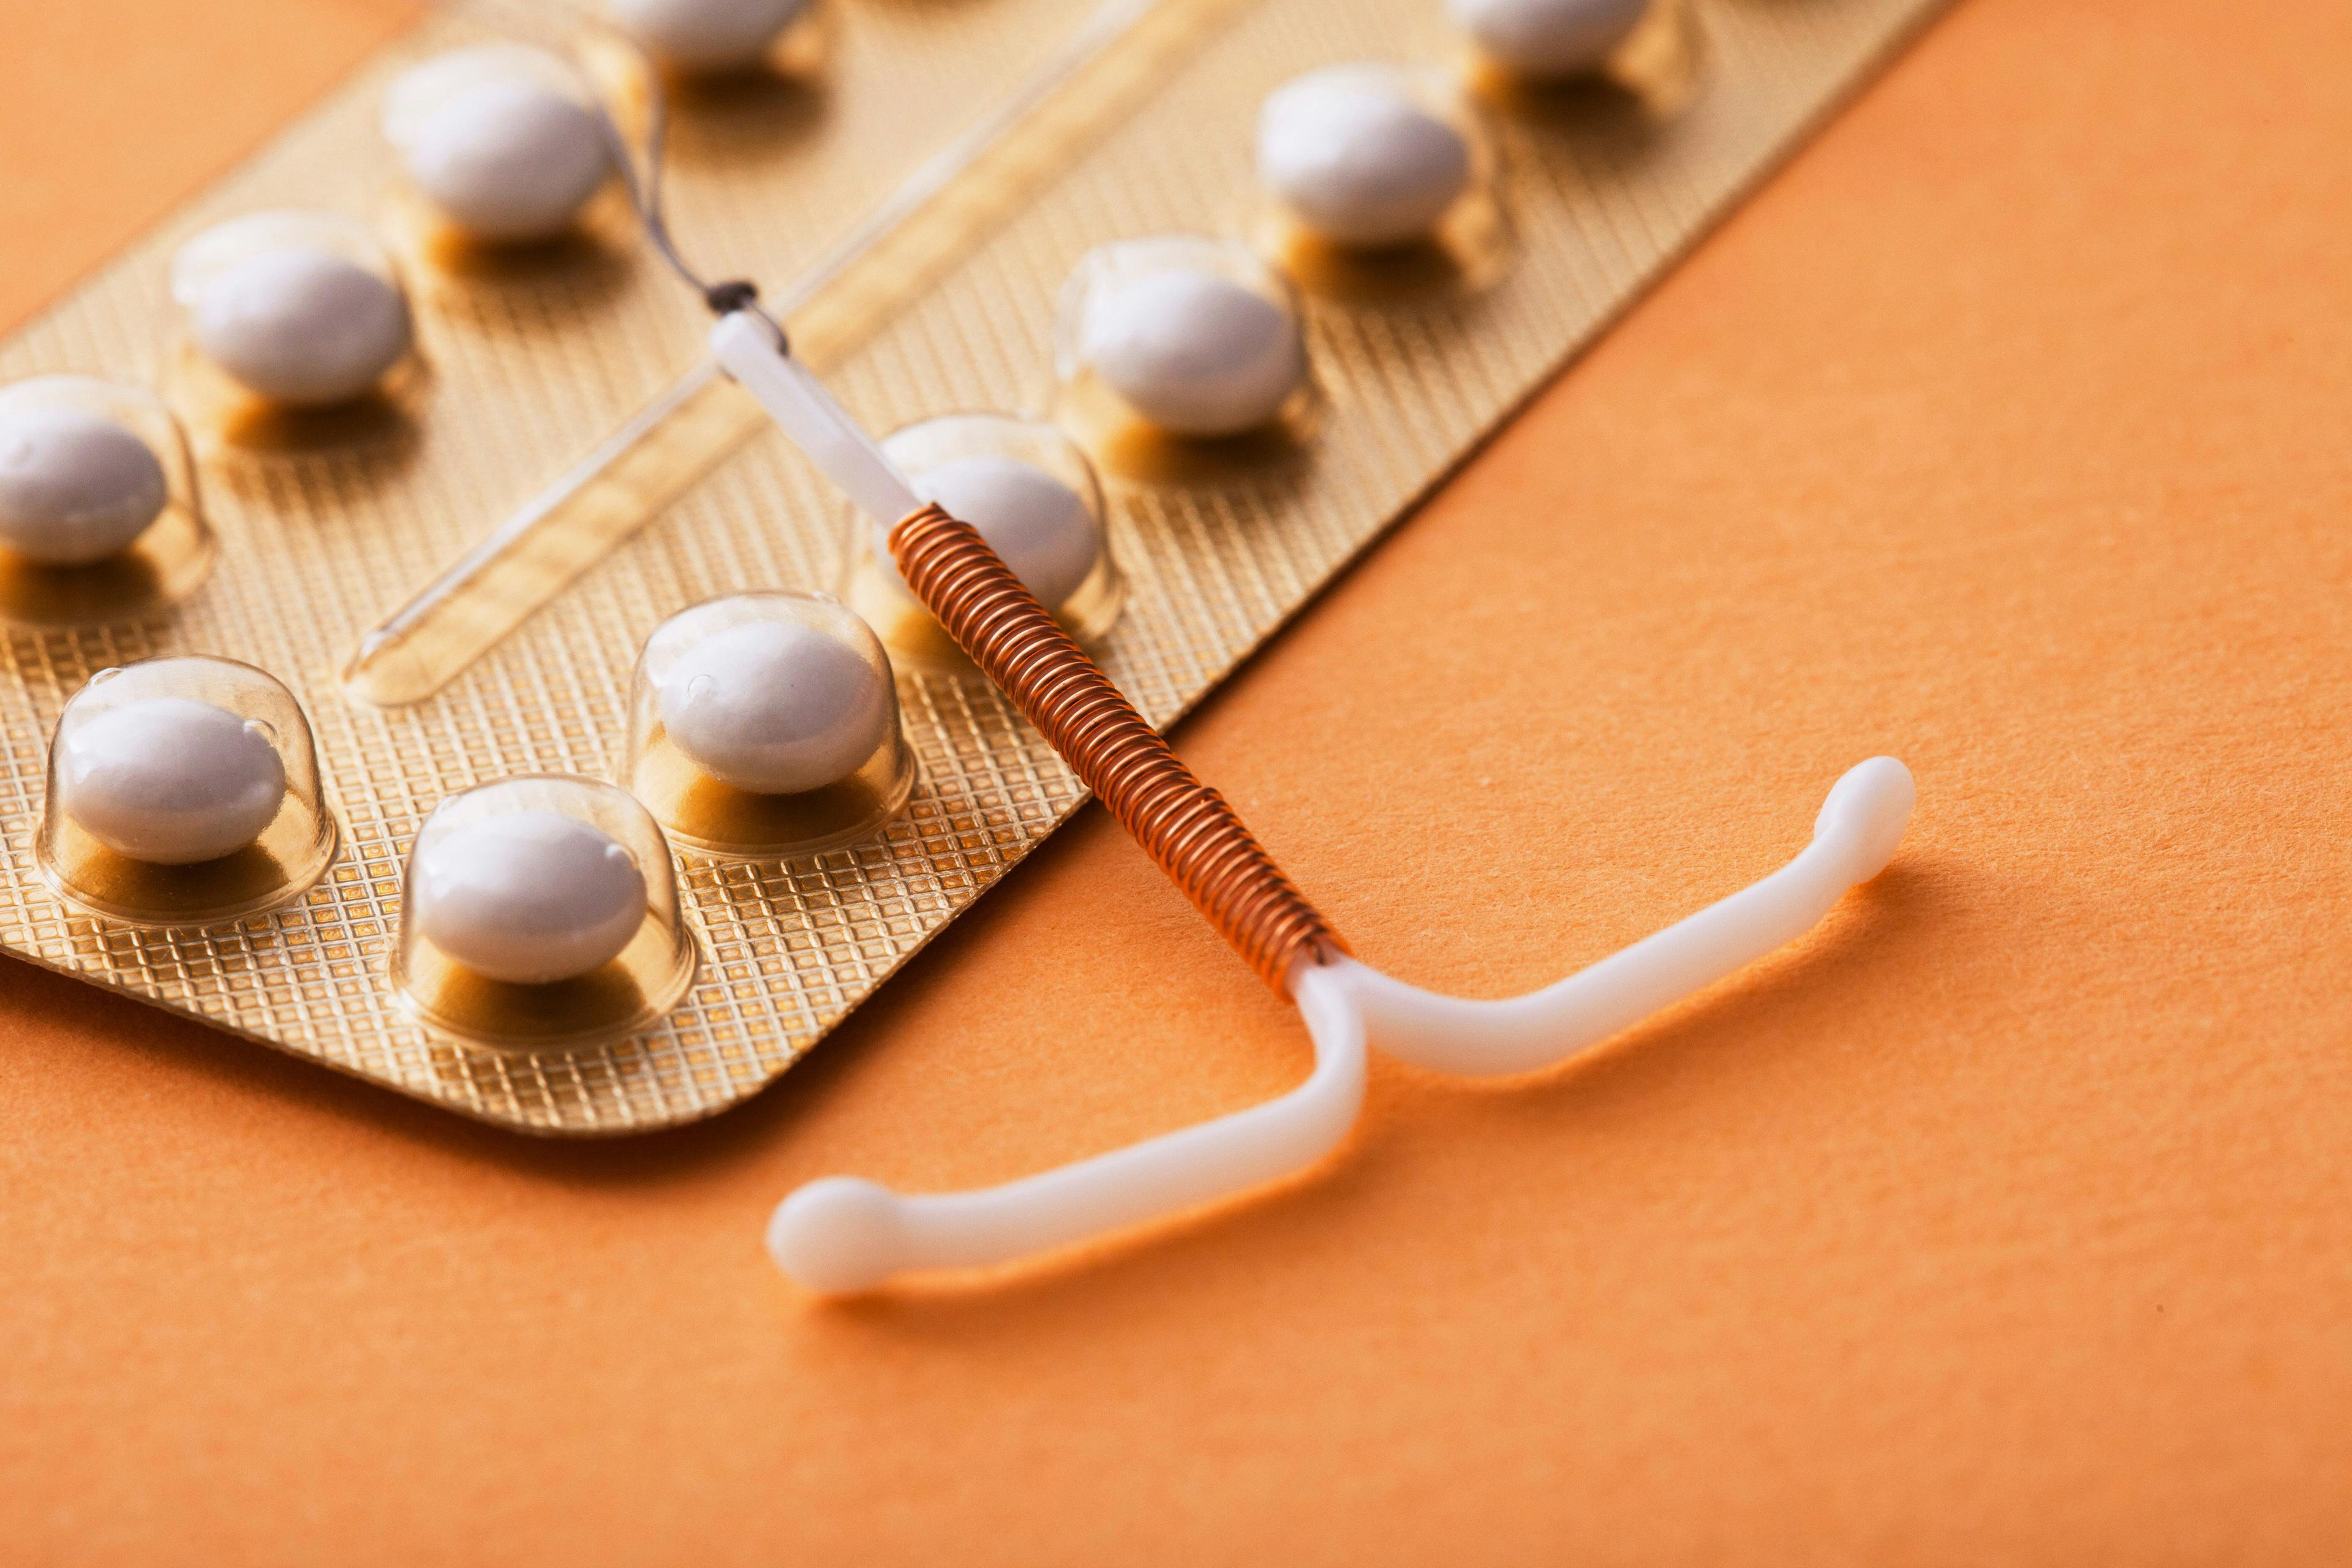 What Is Going On With Male Contraception?